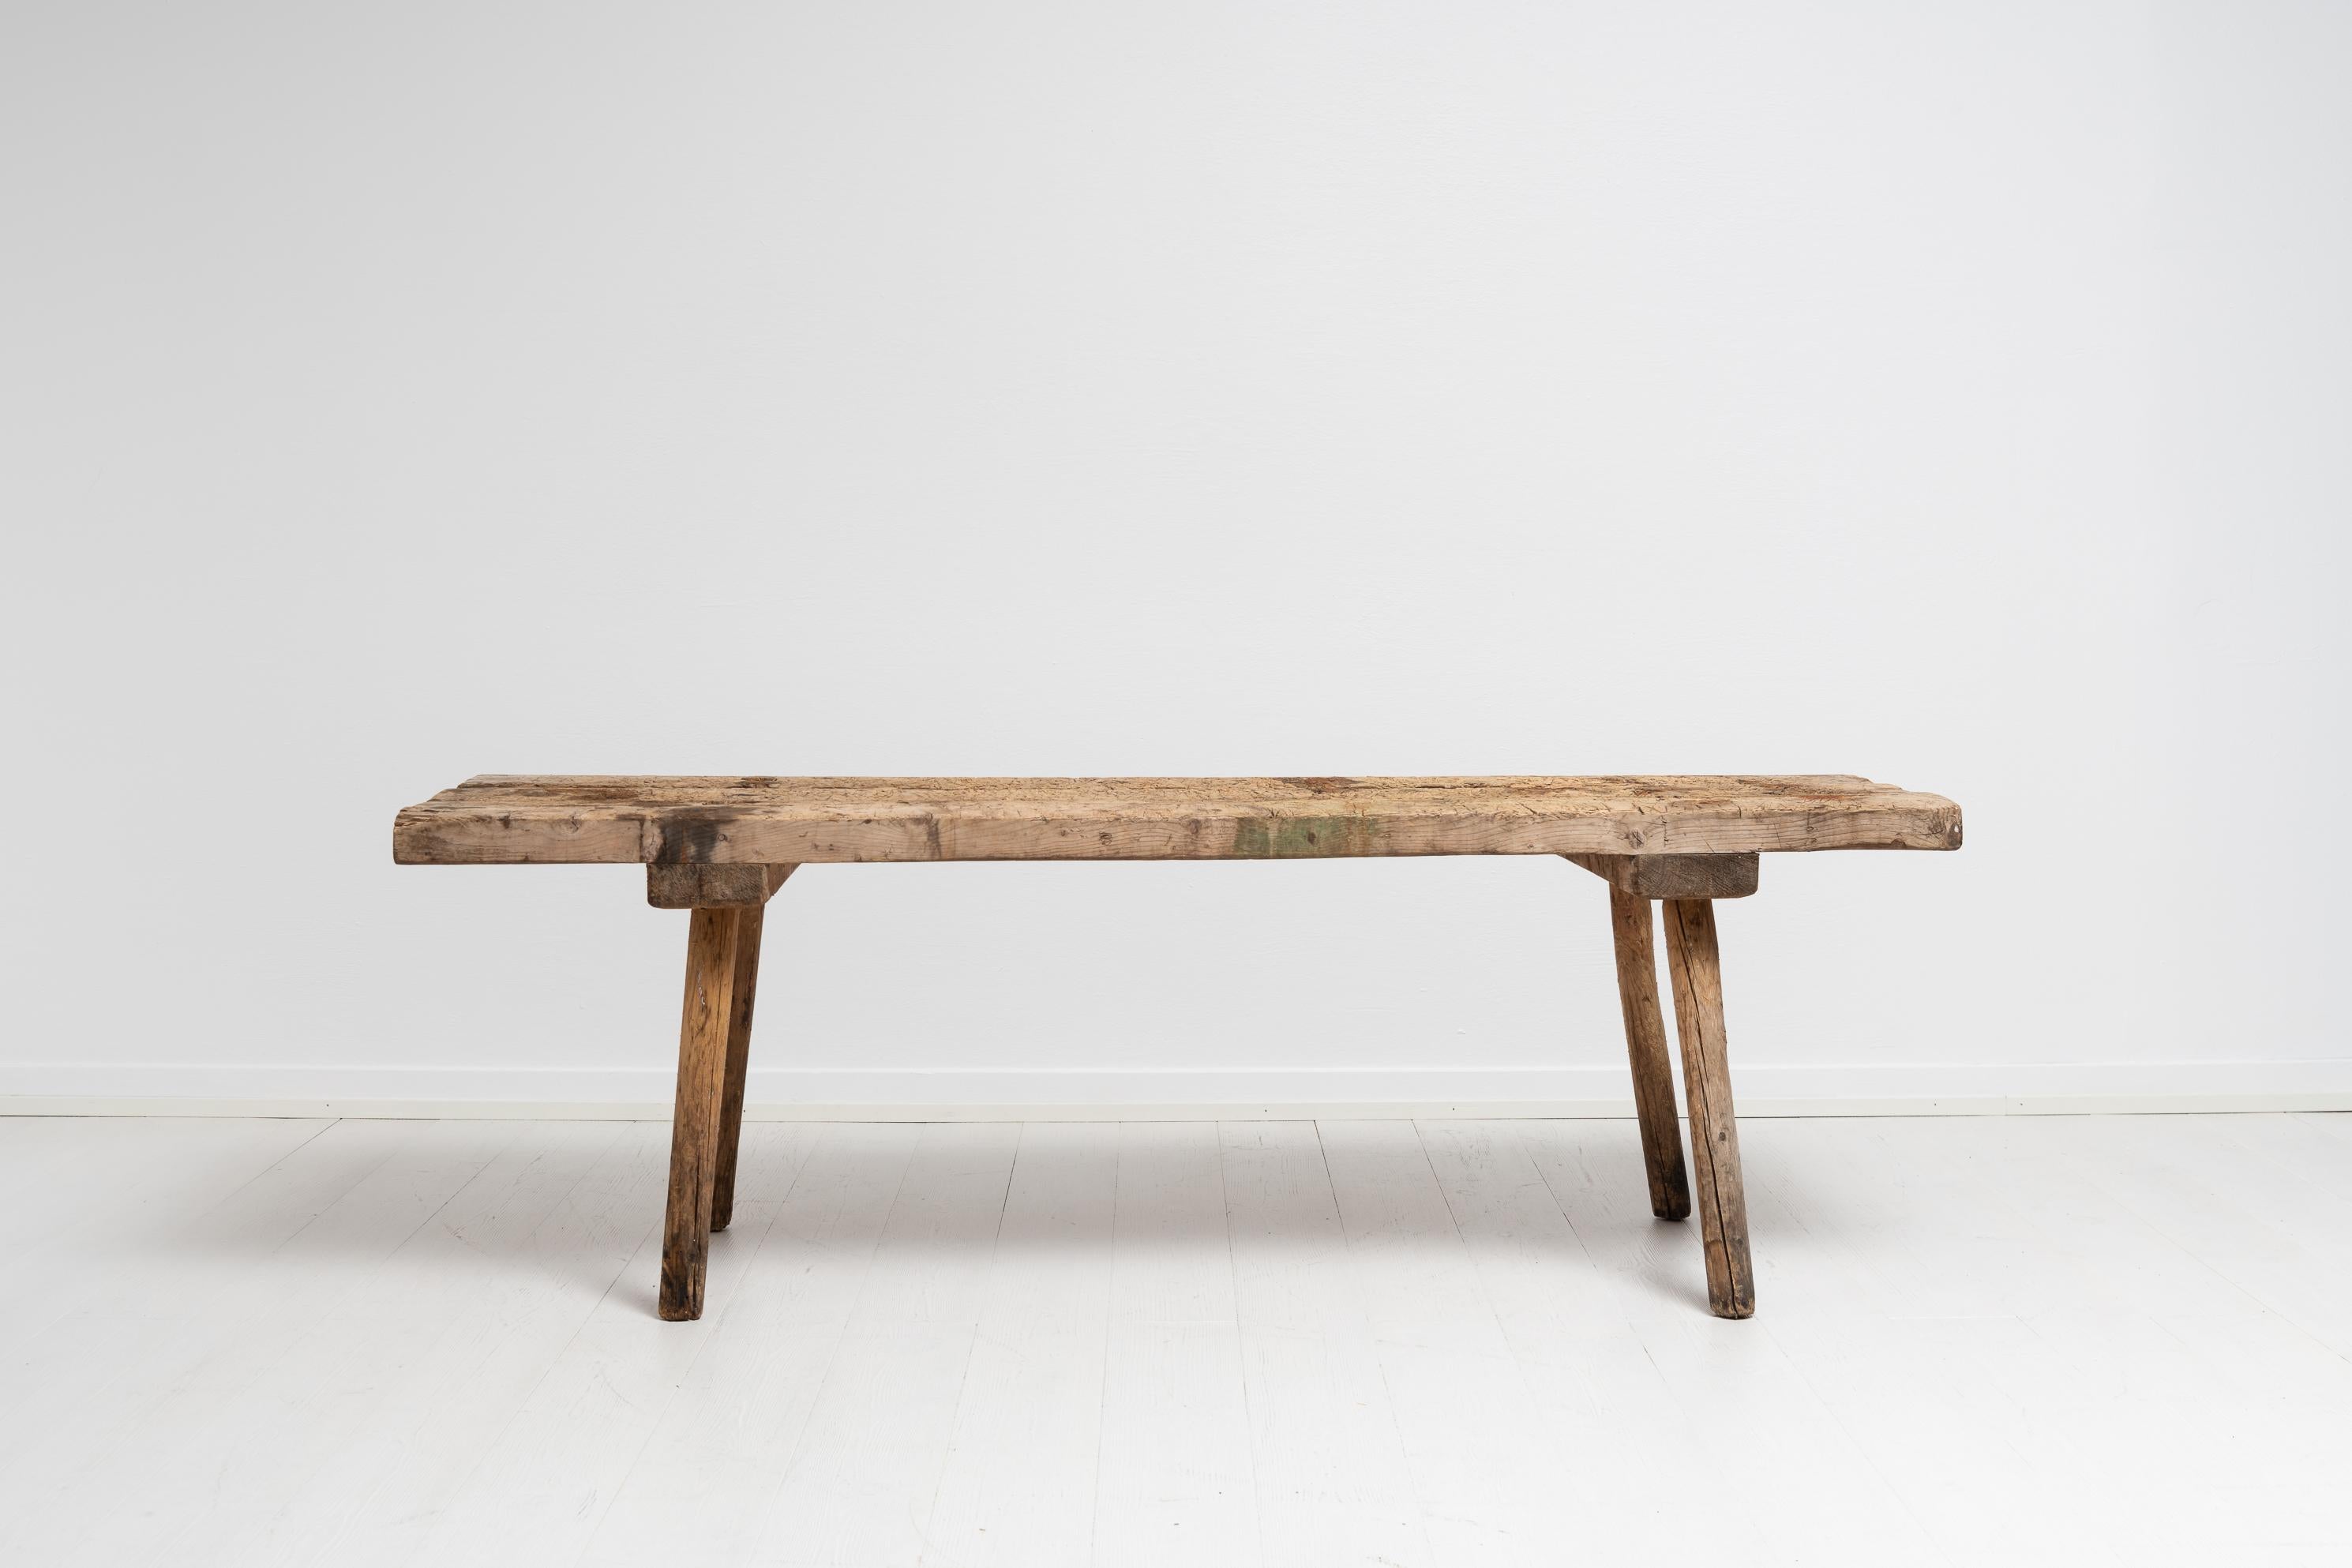 Early 19th Century Swedish Folk Art Rustic Work Bench Coffee Table For Sale 1